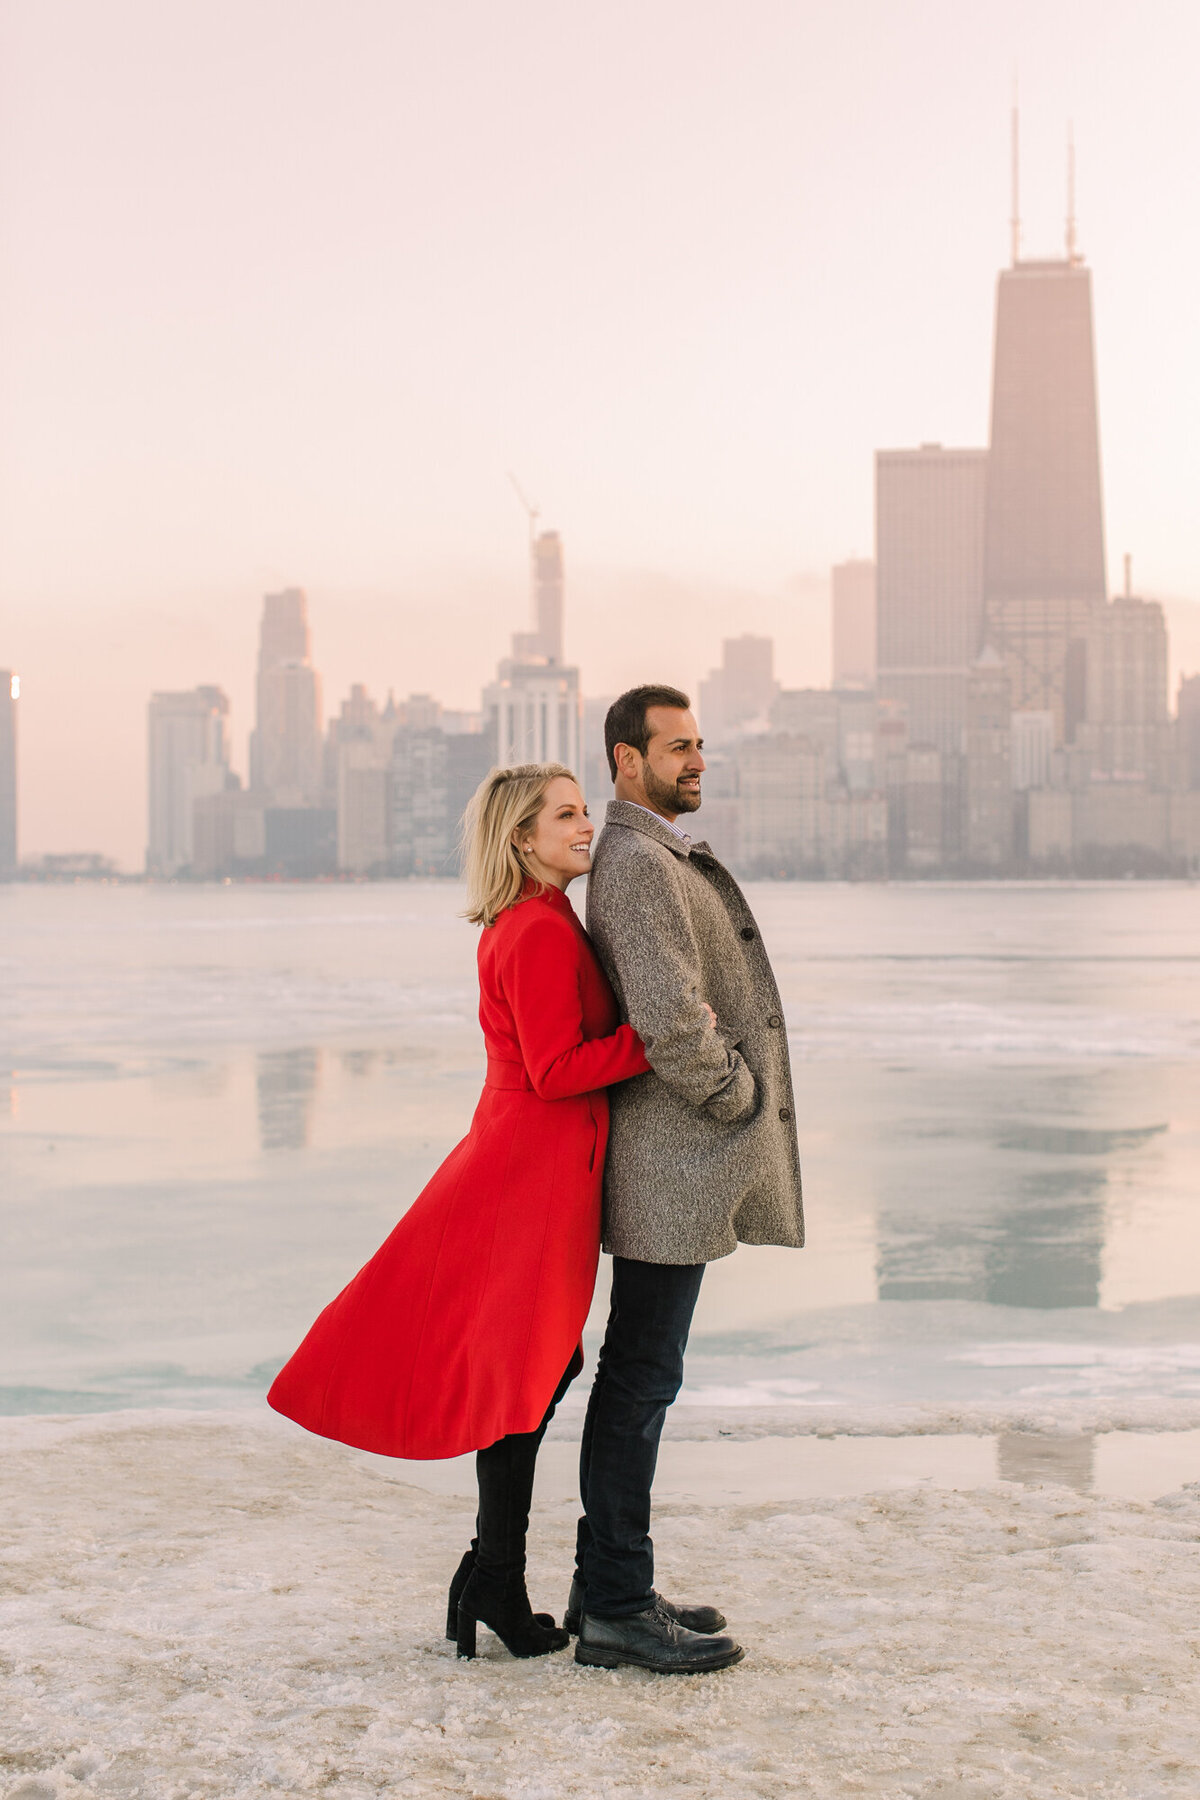 An engagement photo in front of a frozen Lake Michigan with the Chicago skyline in the background.